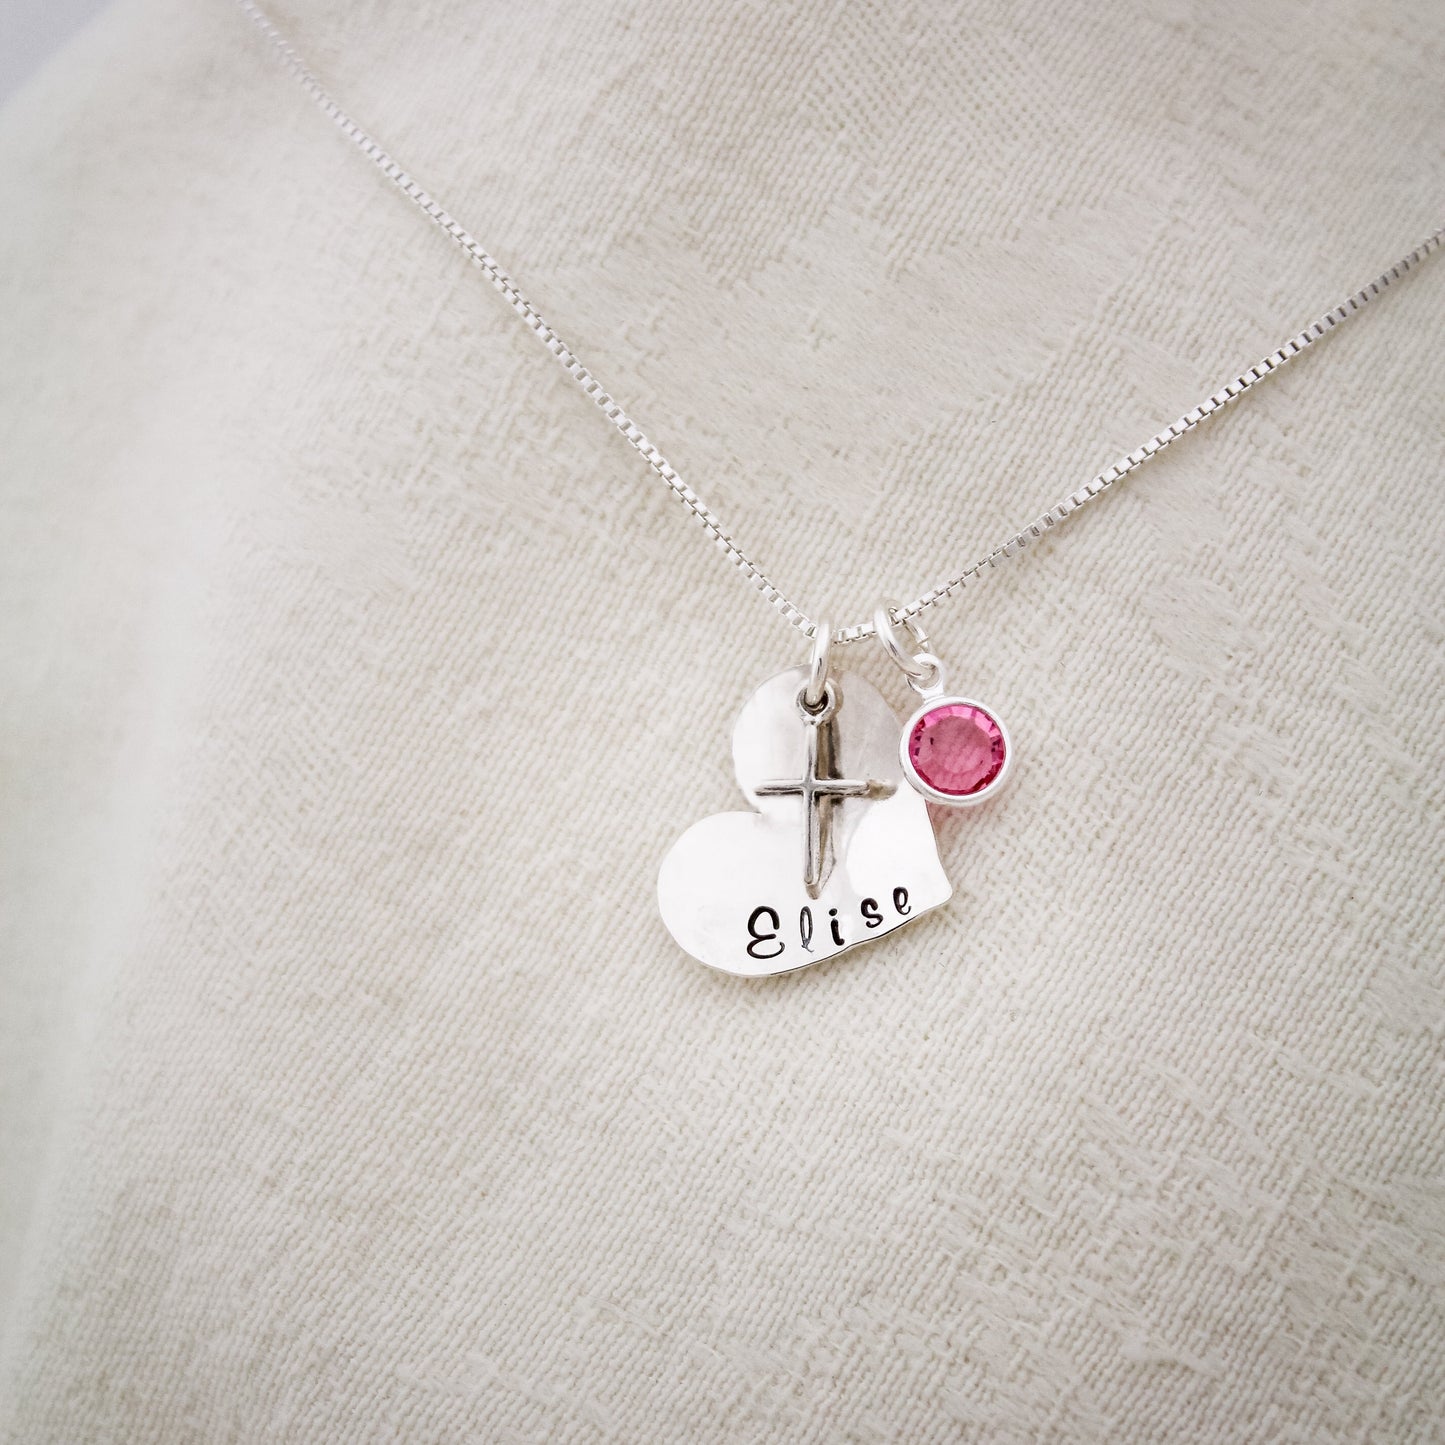 Heart Confirmation Cross Necklace with Birthstone, Hand Stamped Personalized Sterling Silver Confirmation Jewelry, Custom Cross Necklace